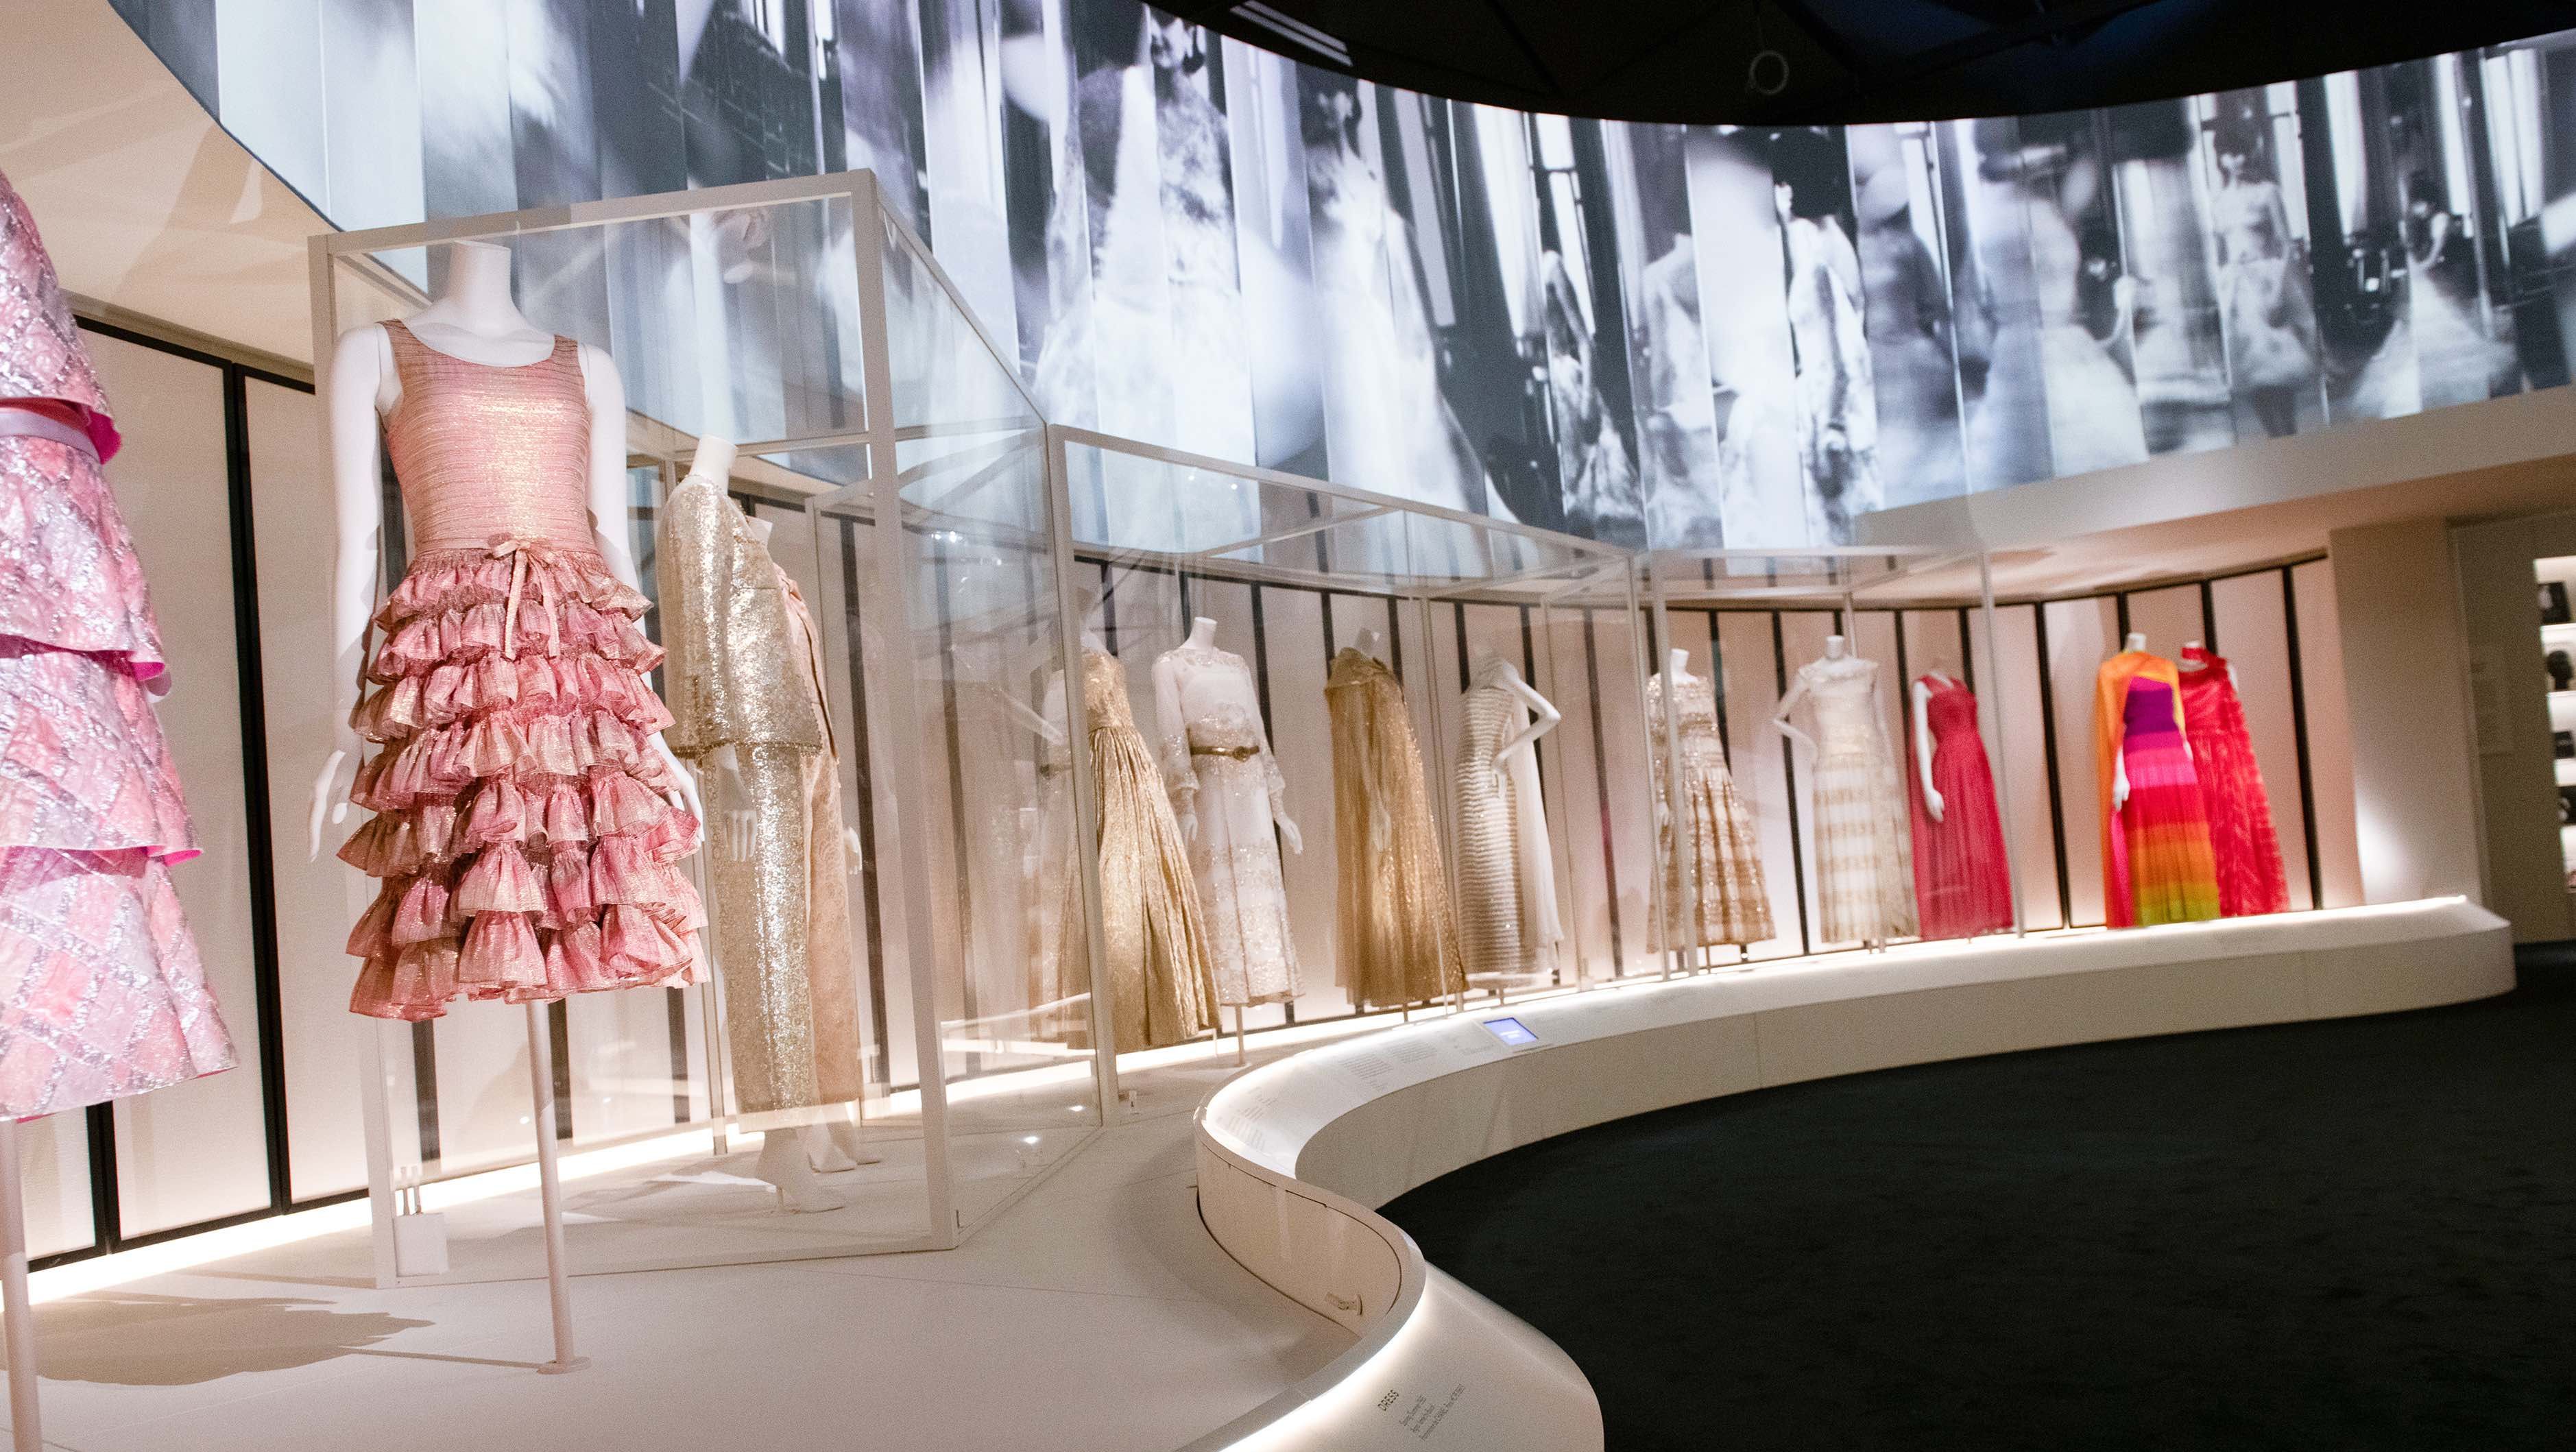 An exclusive look inside the new Gabrielle “Coco” Chanel